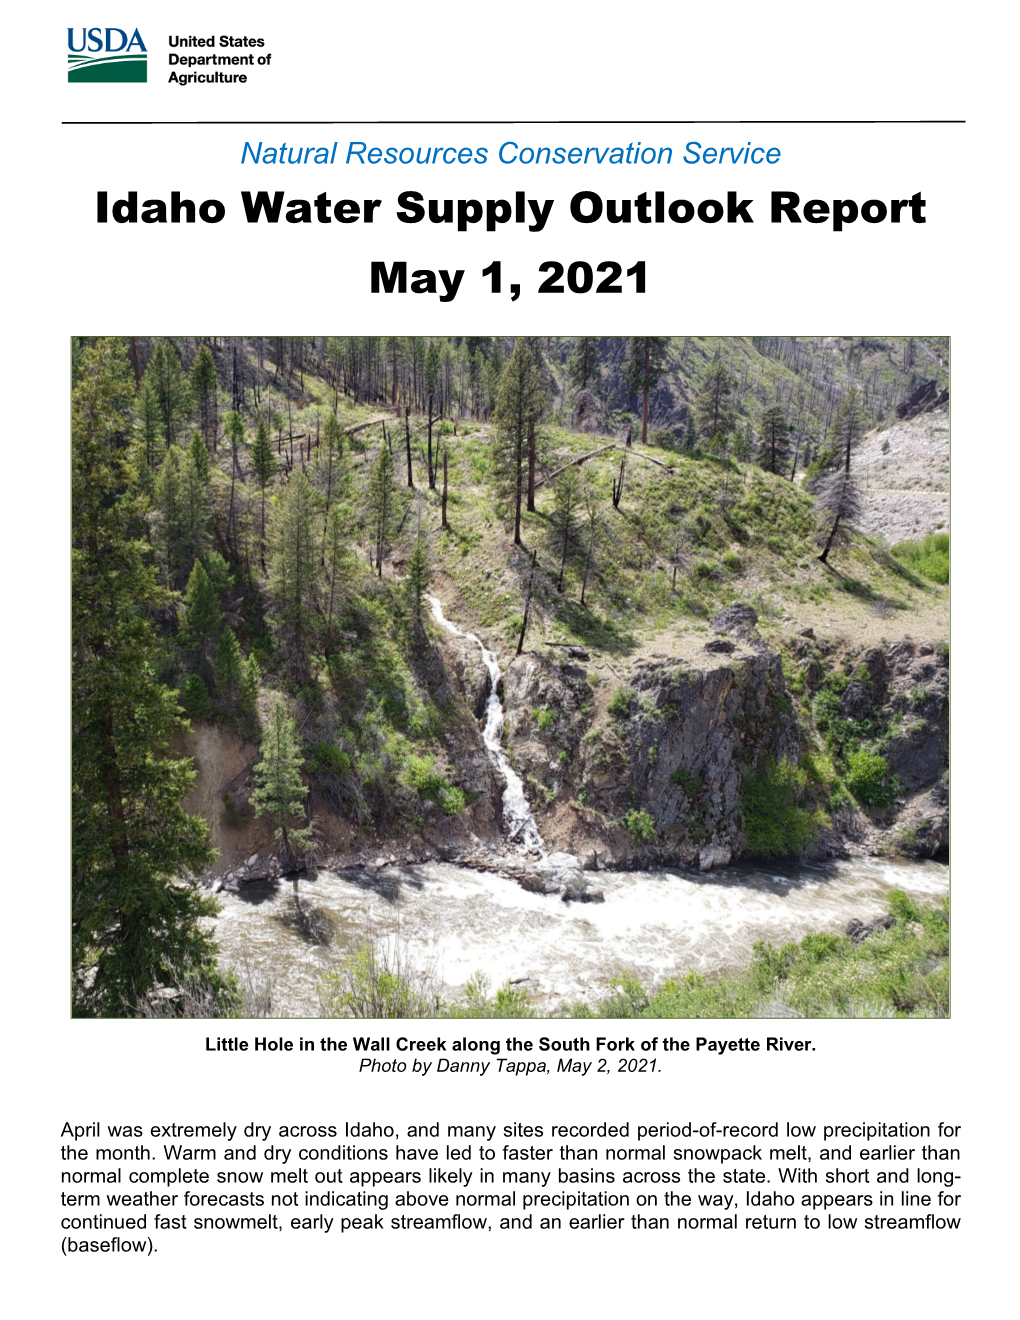 Idaho Water Supply Outlook Report May 1, 2021